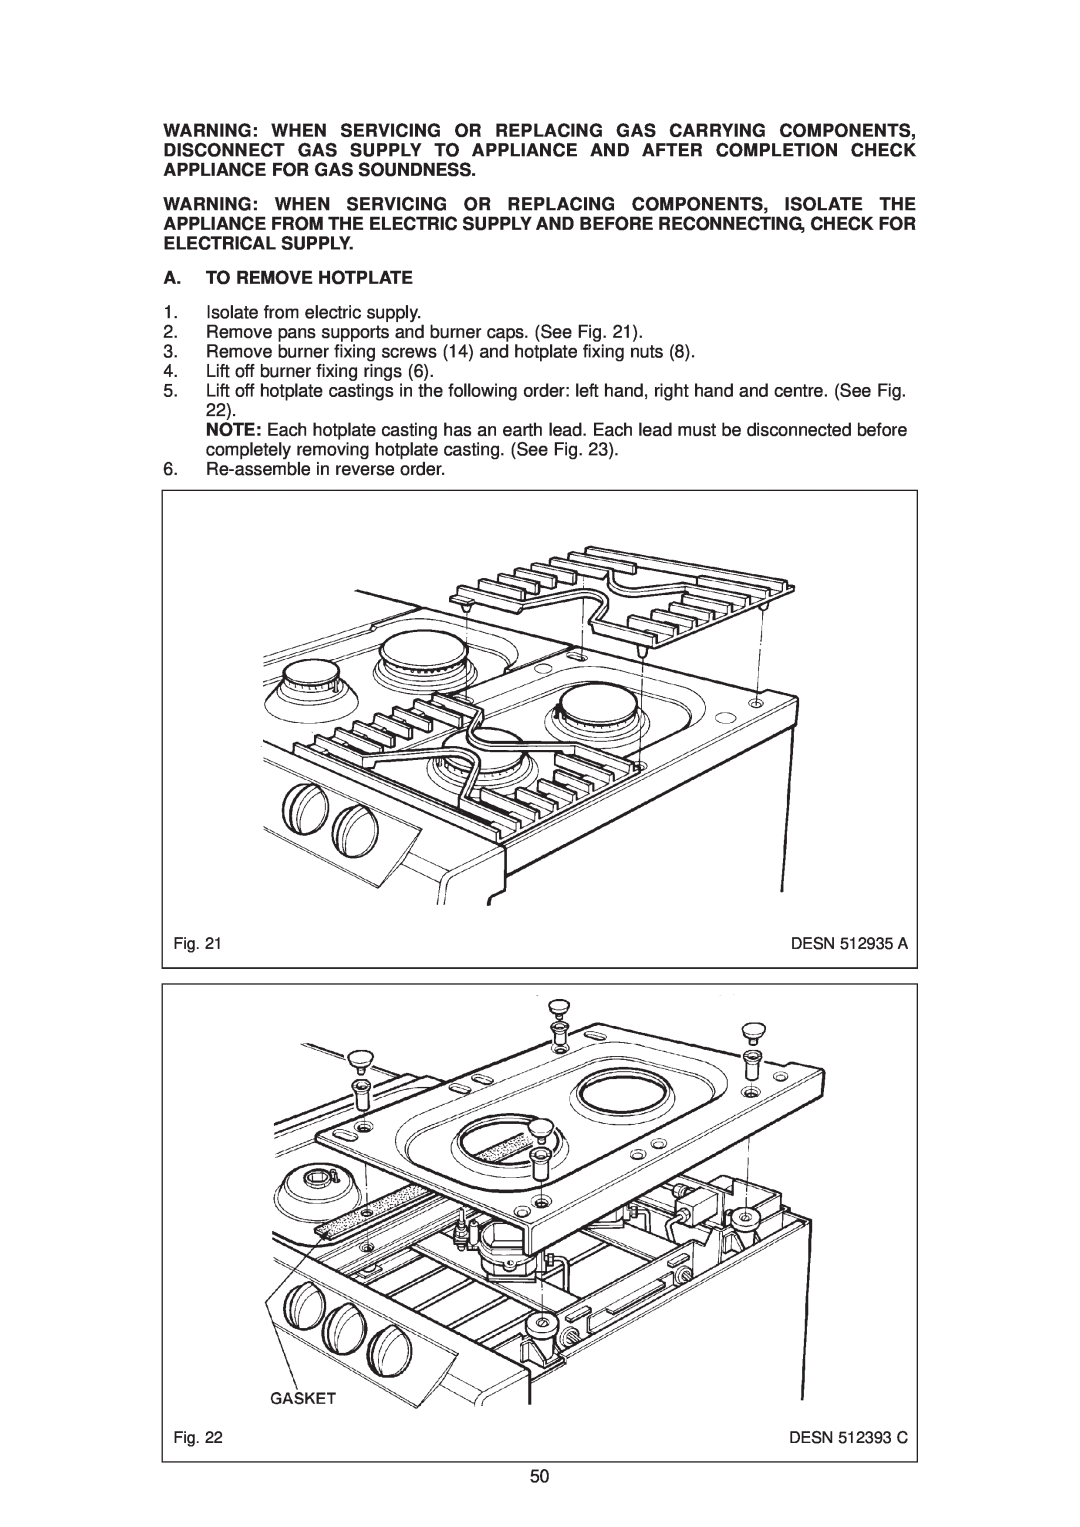 Aga Ranges DESN 512387 A owner manual A. To Remove Hotplate 